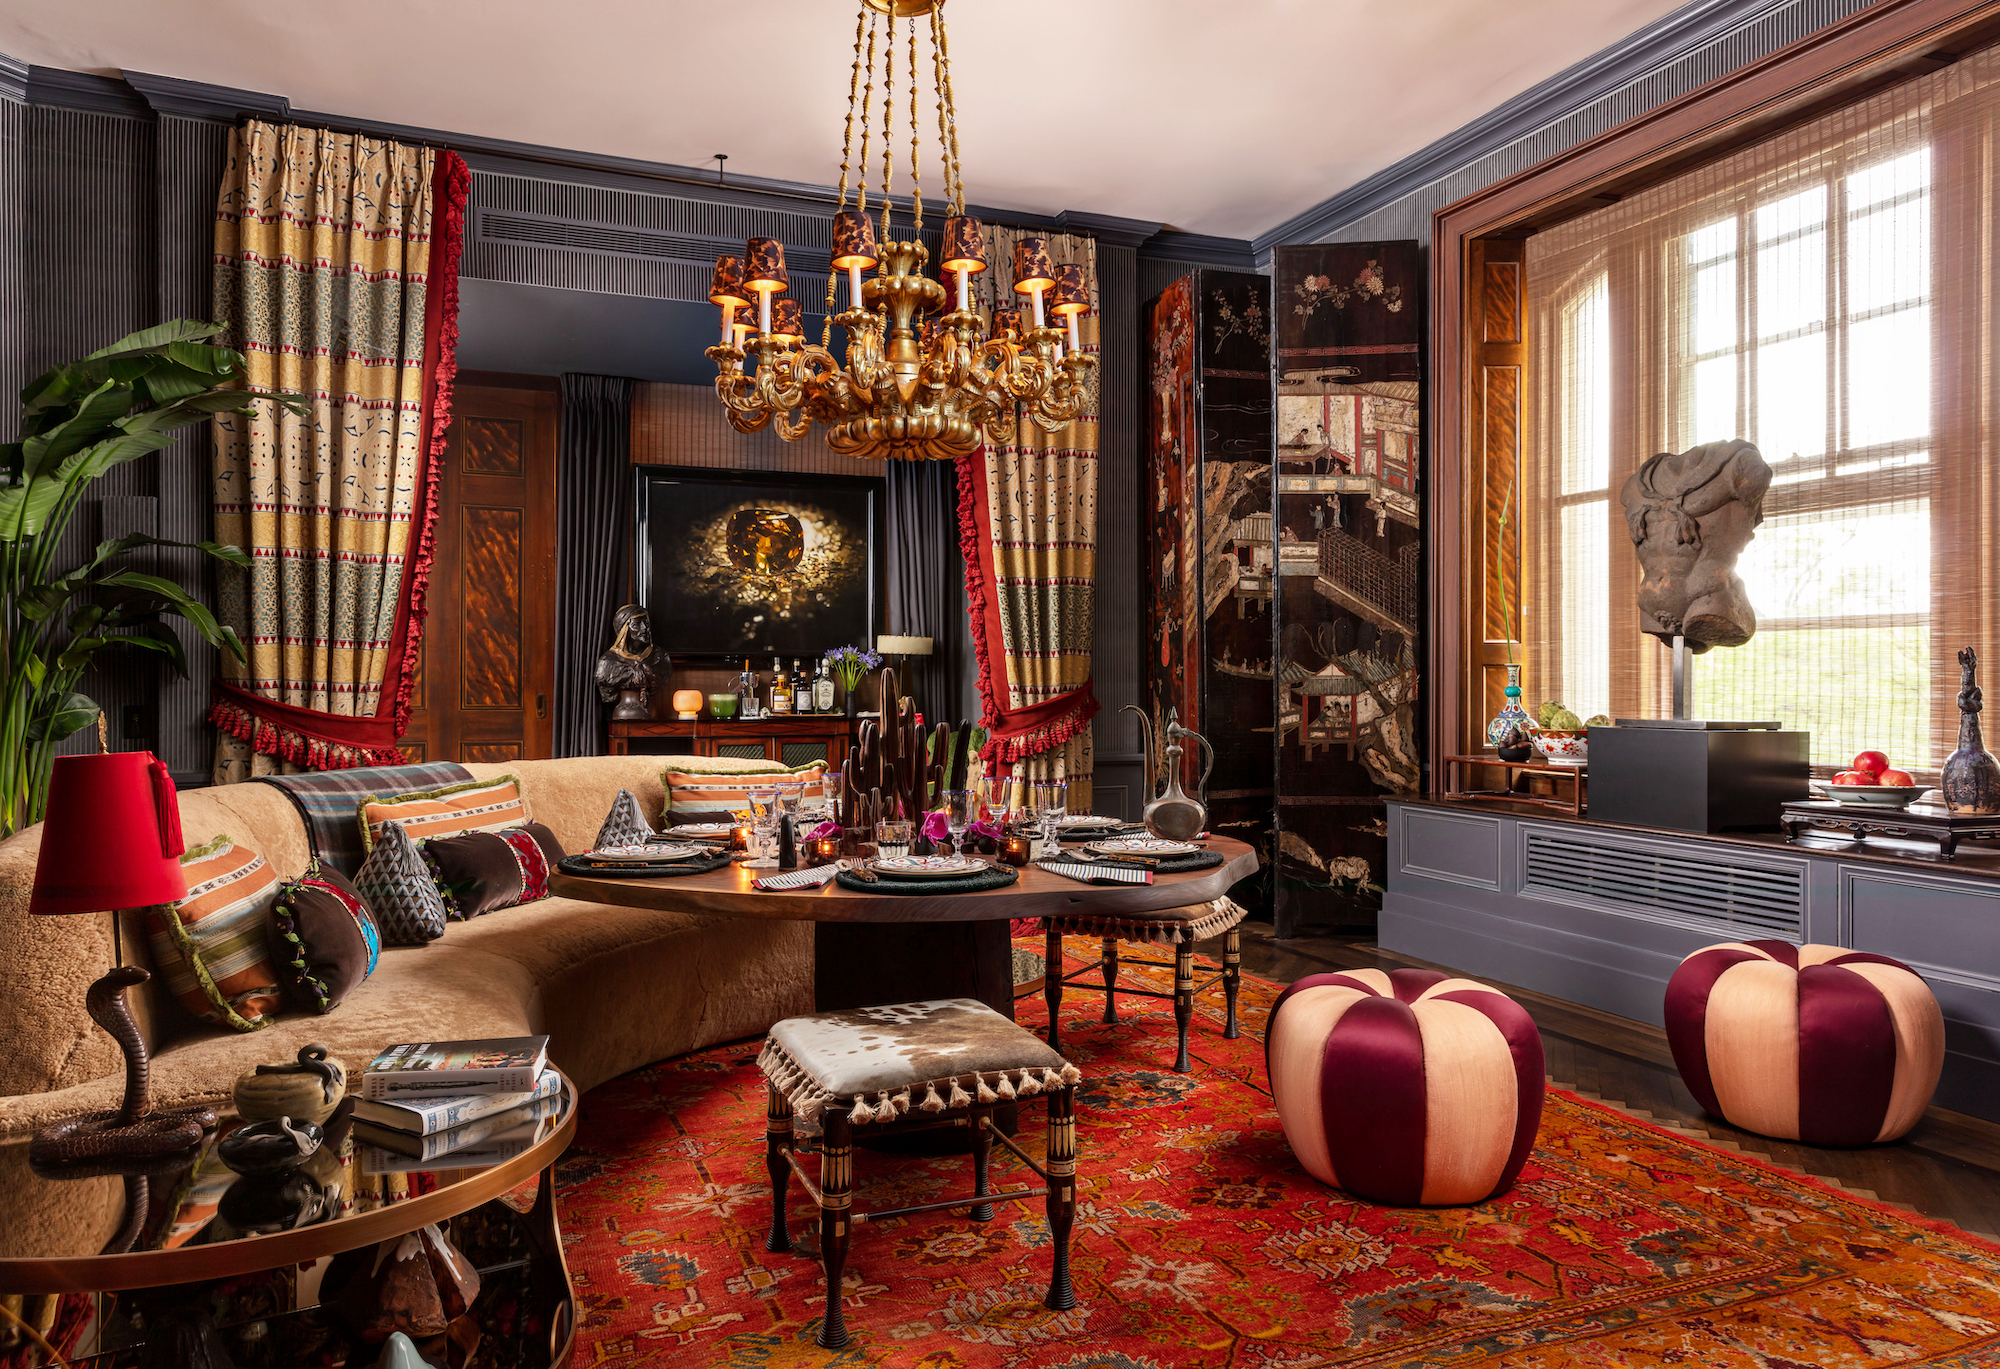 Georgis & Mirgorodsky created a sumptuous space for intimate soirees at Kips Bay Decorator Show House New York 2023 